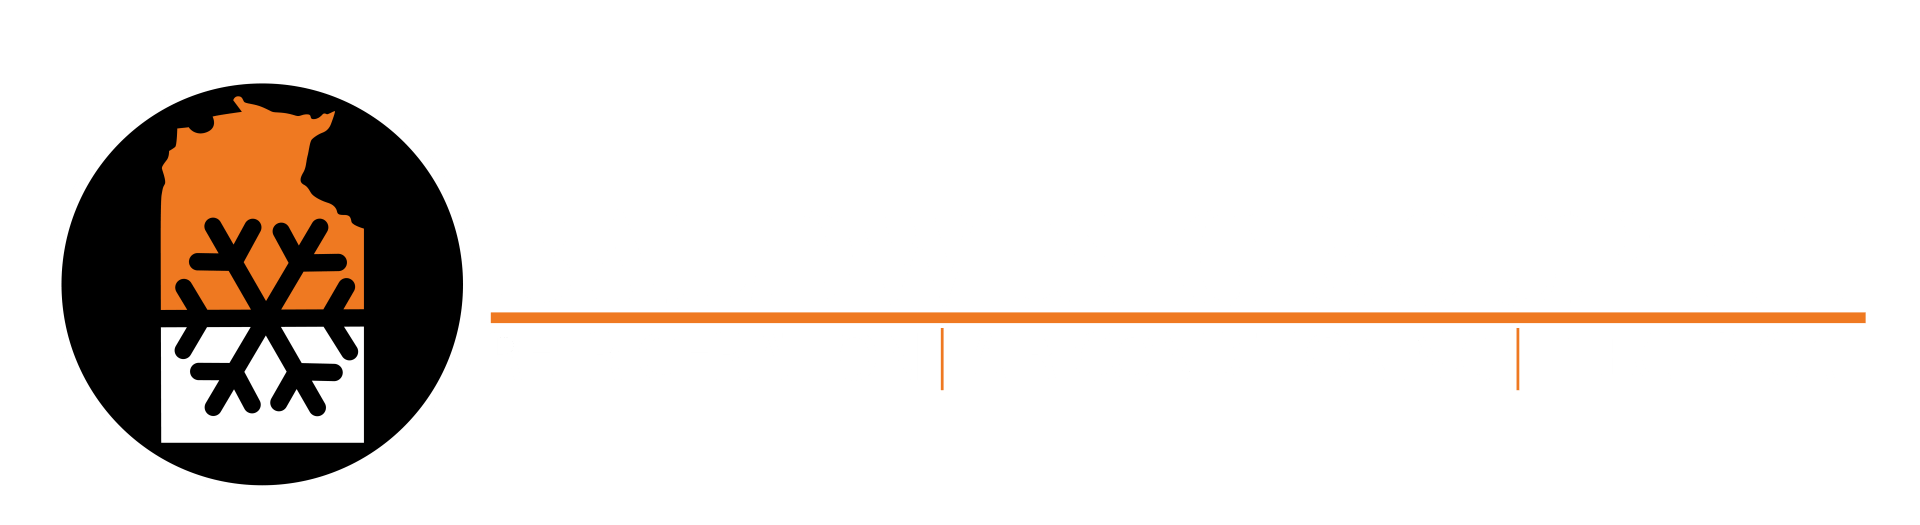 Baldwin Group NT: Air Conditioning & Refrigeration in Darwin